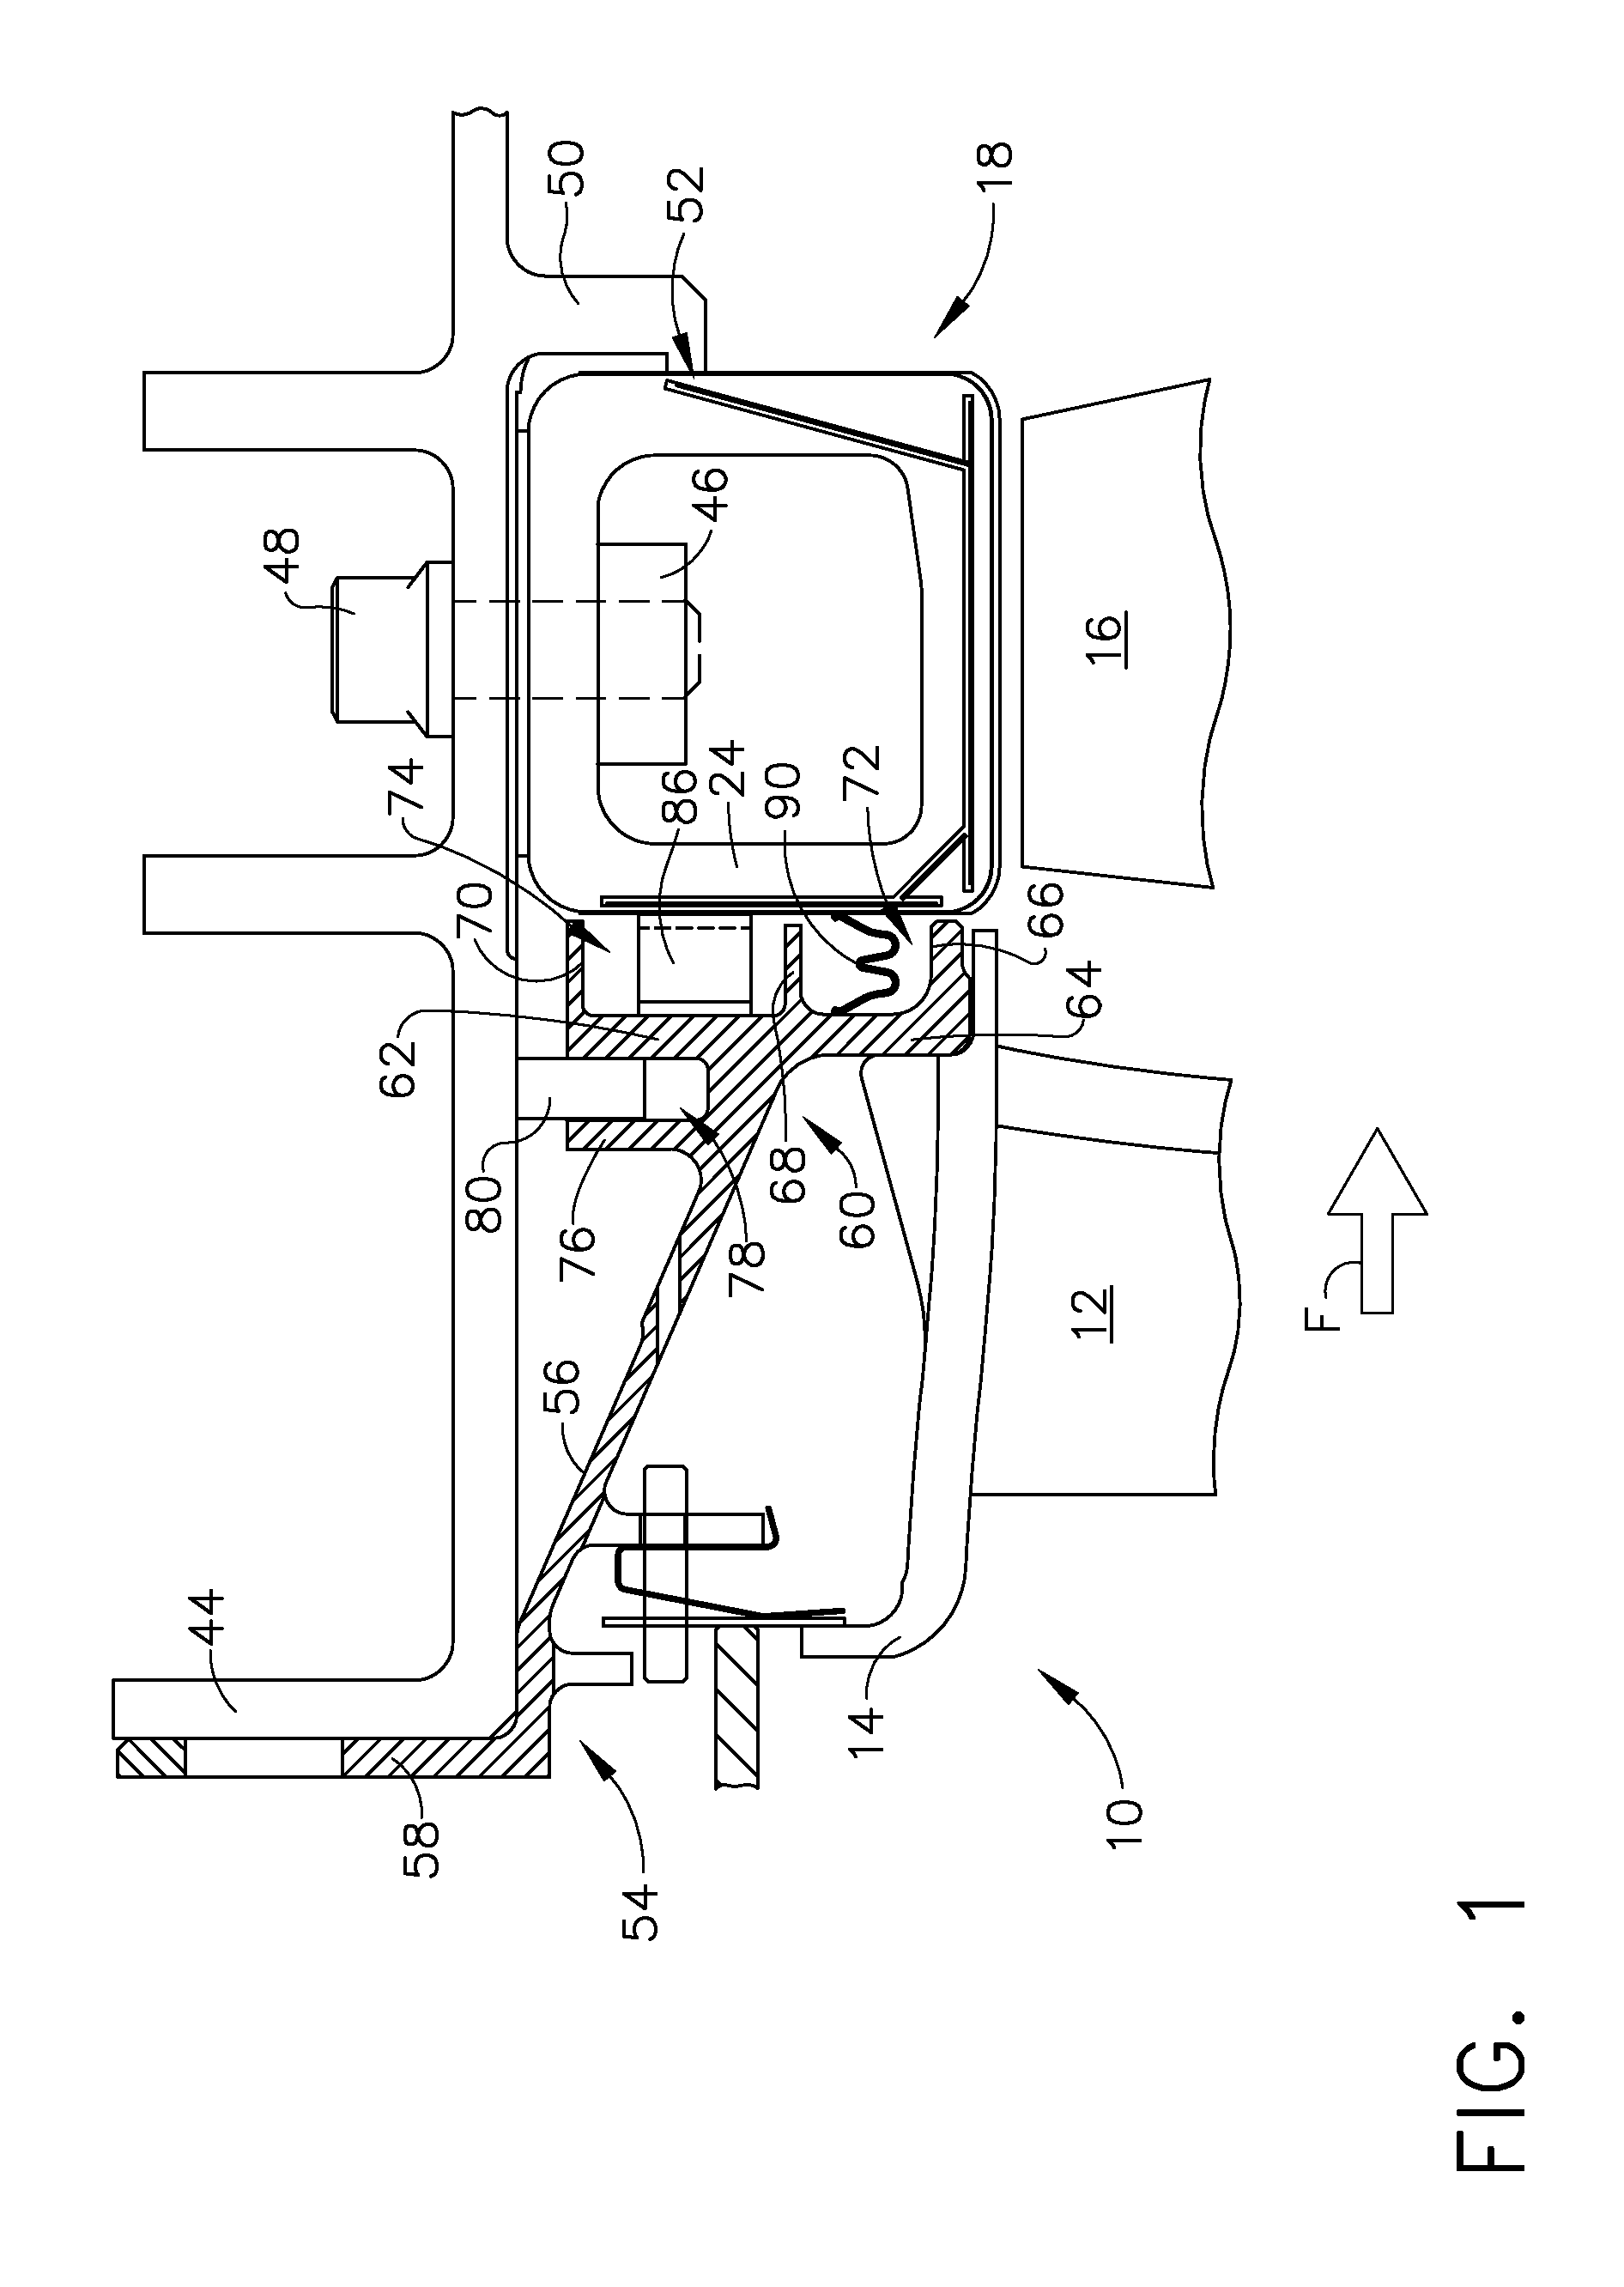 Resilient mounting apparatus for low-ductility turbine shroud